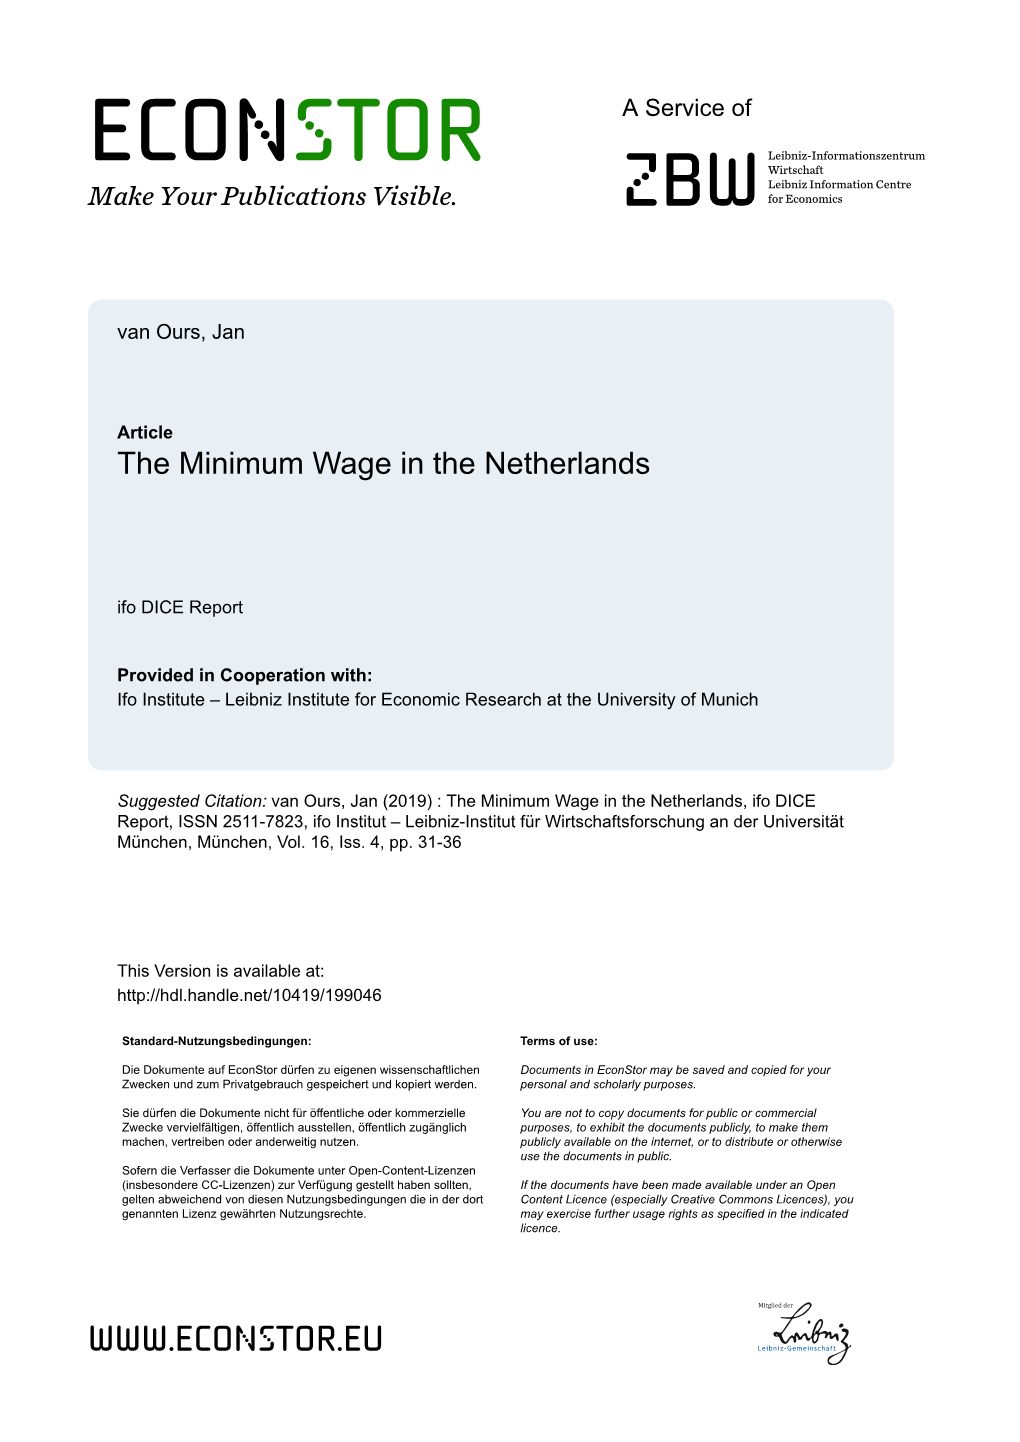 The Minimum Wage in the Netherlands